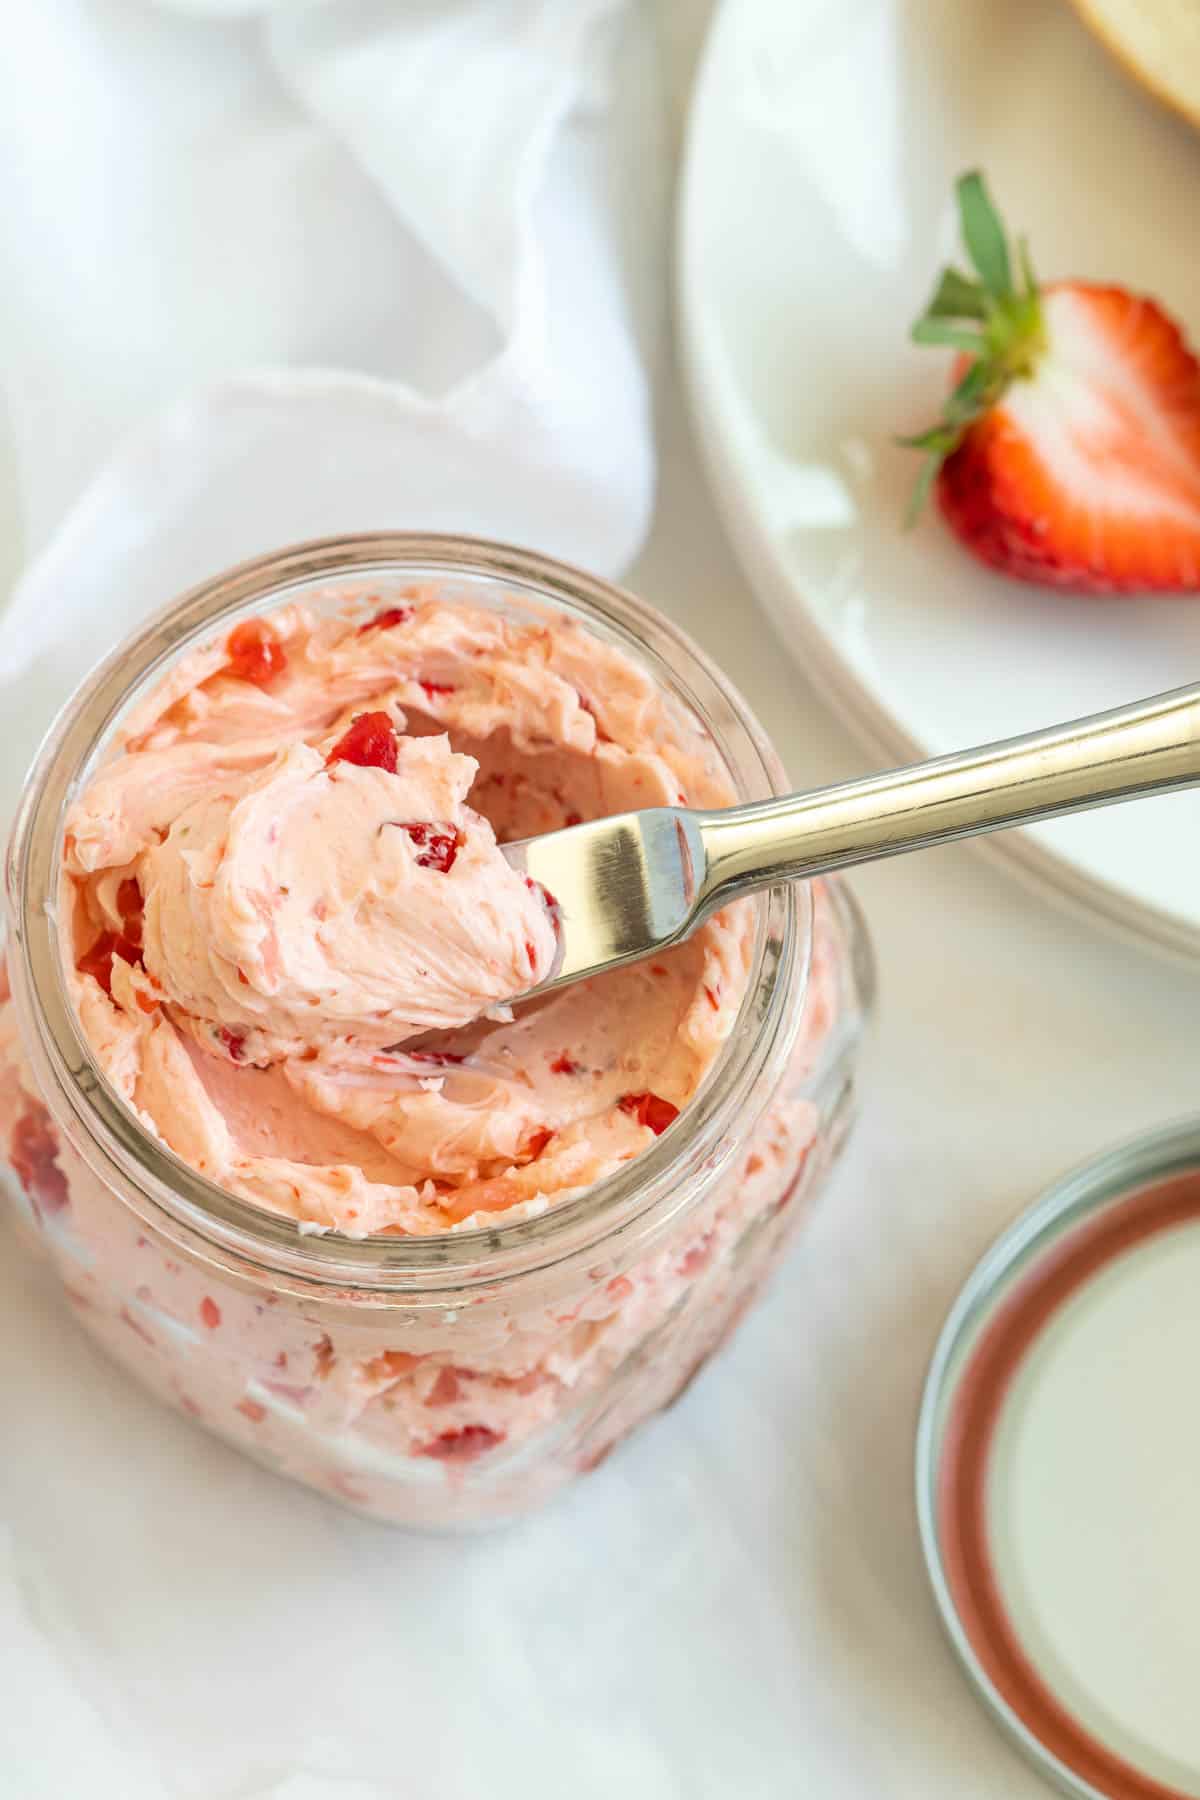 Overhead view of a jar of strawberry honey butter with a spreading butter knife.